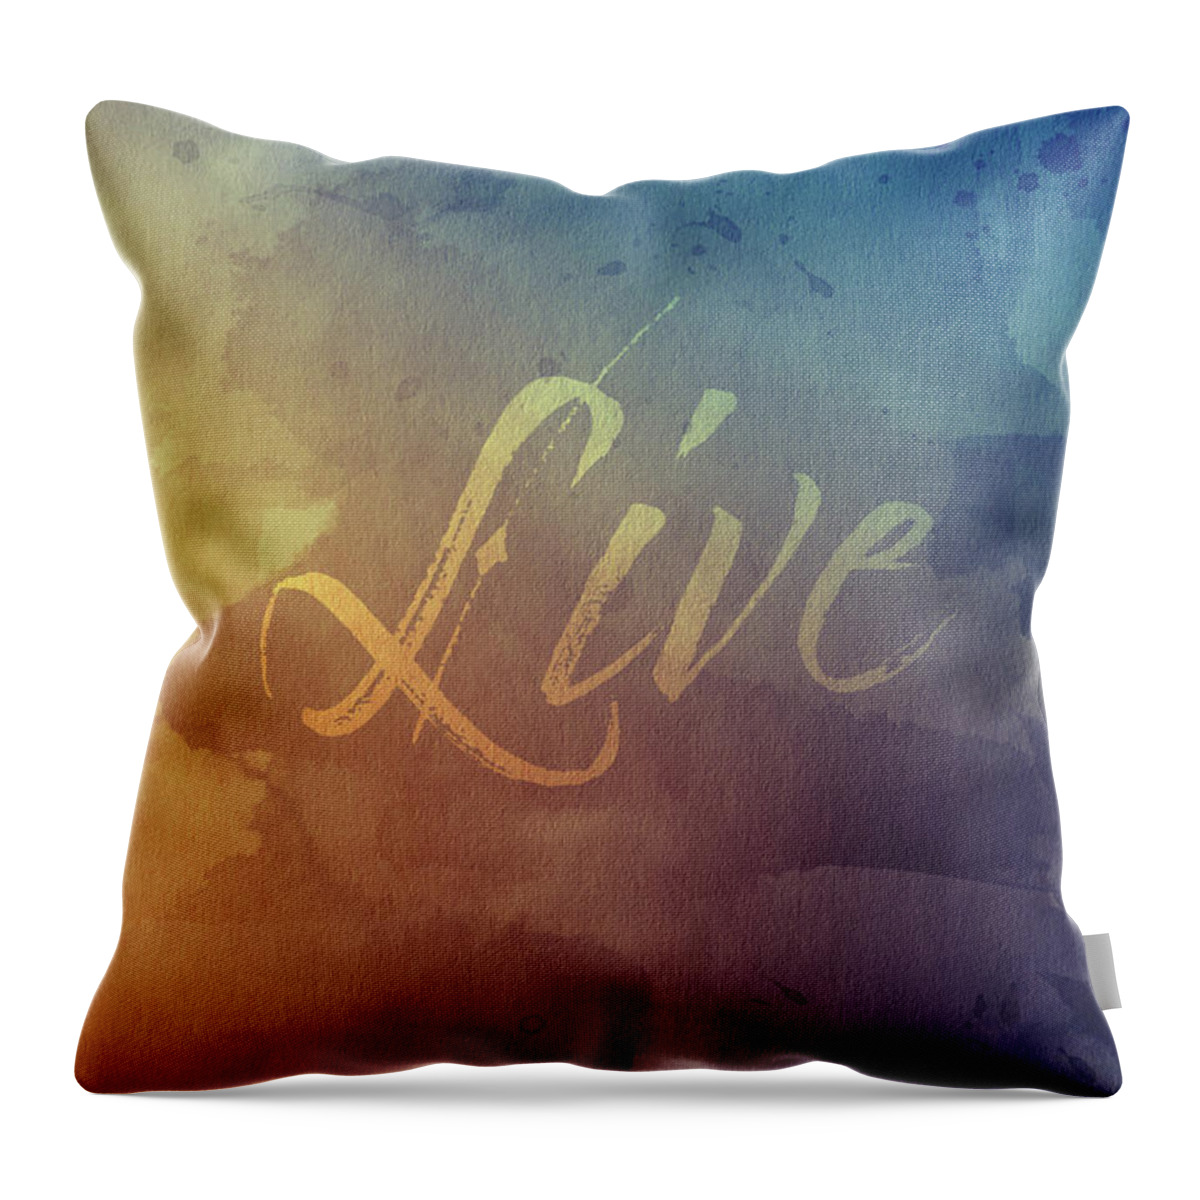 Watercolor Throw Pillow featuring the digital art Watercolor Art Live by Amelia Pearn